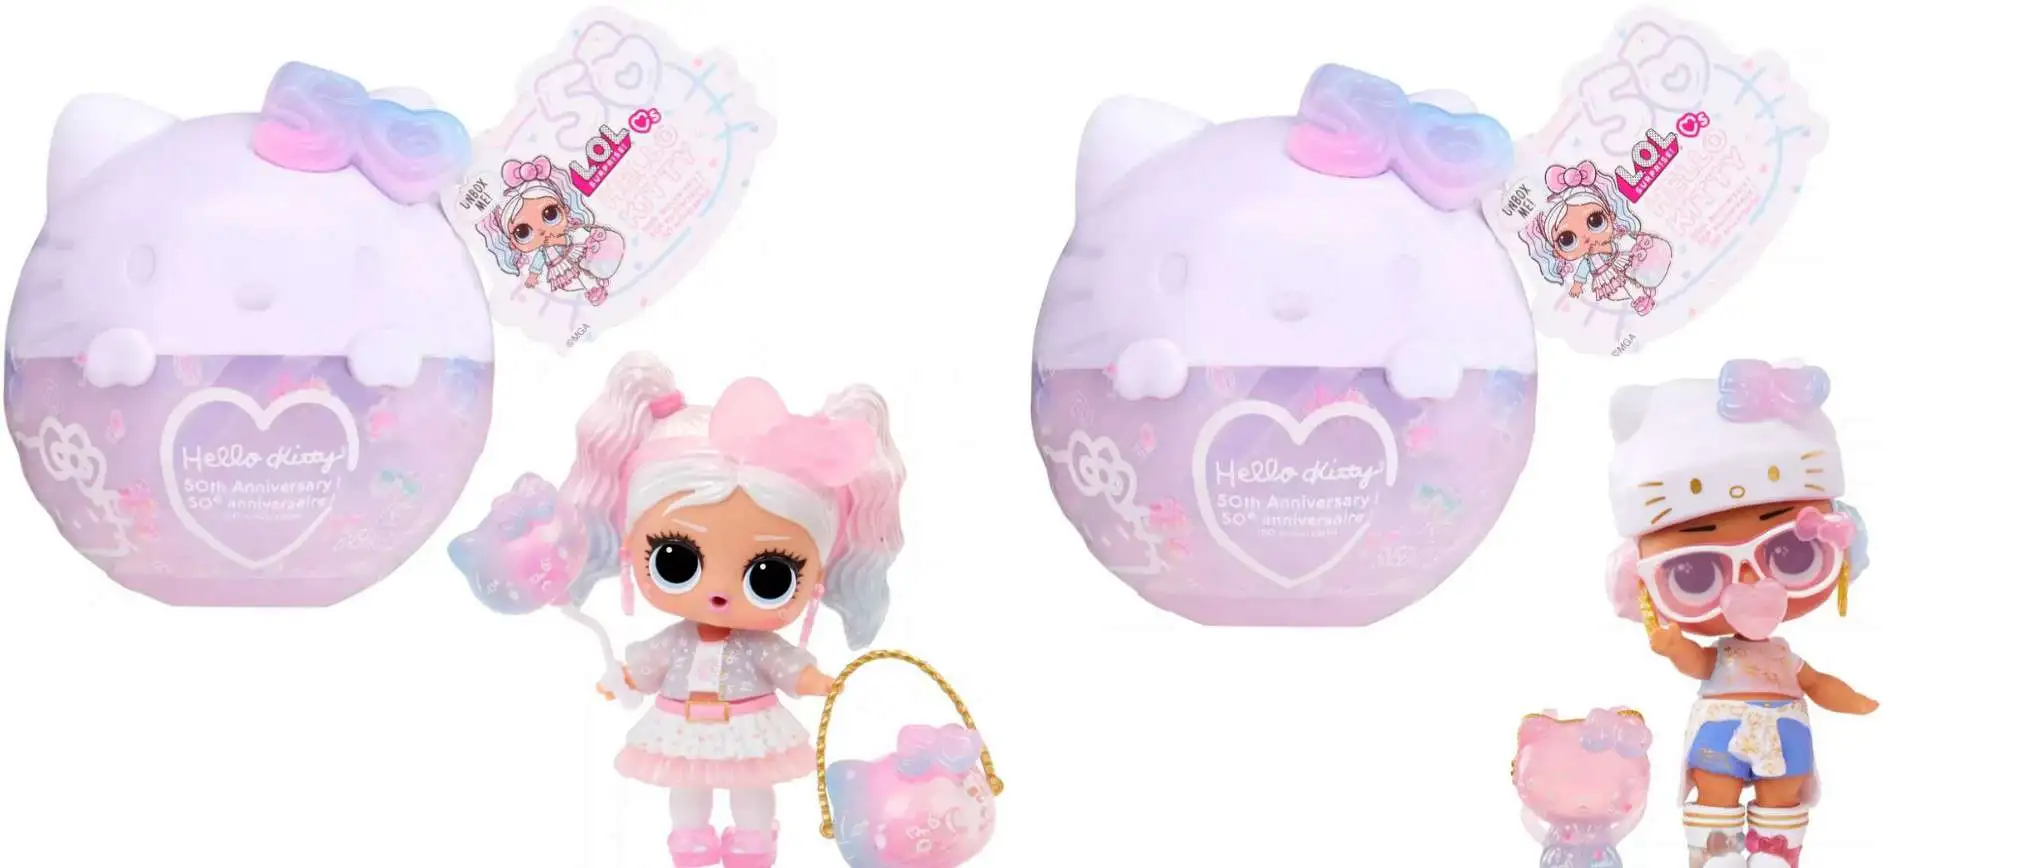 LOL Surprise Loves Hello Kitty Doll Miss Pearly Crystal Cutie Set of 2  Packs 50th Anniversary MGA Entertainment - ToyWiz